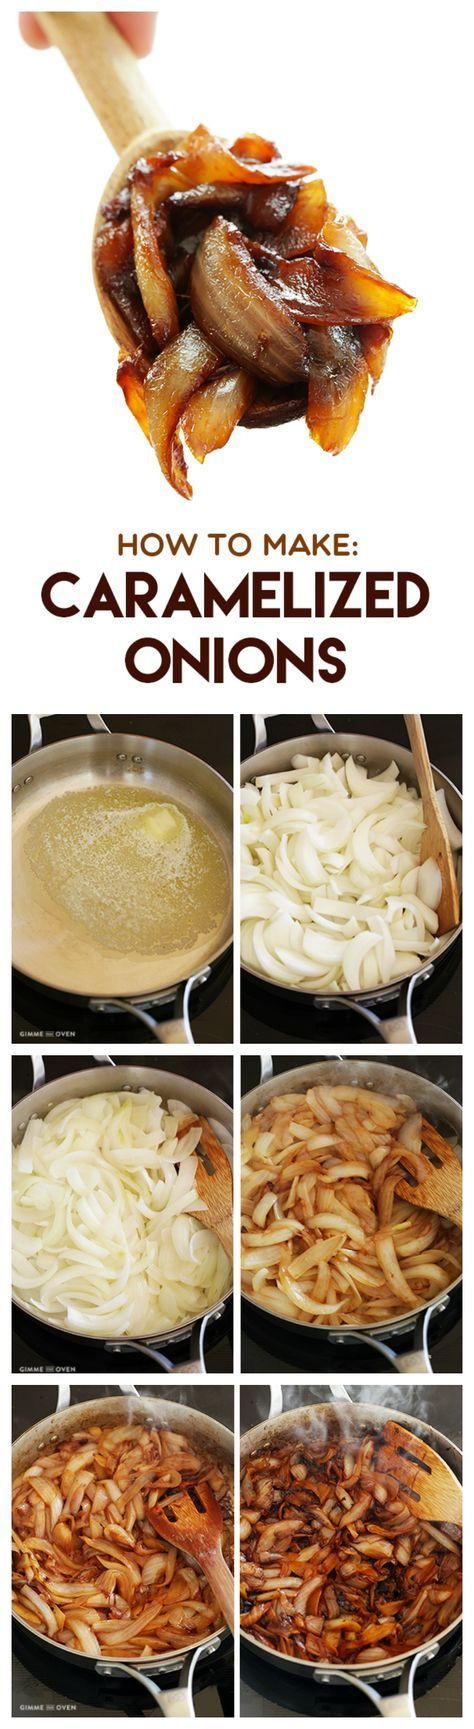 Good Side Dishes For Hamburgers
 Caramelized ions Recipe